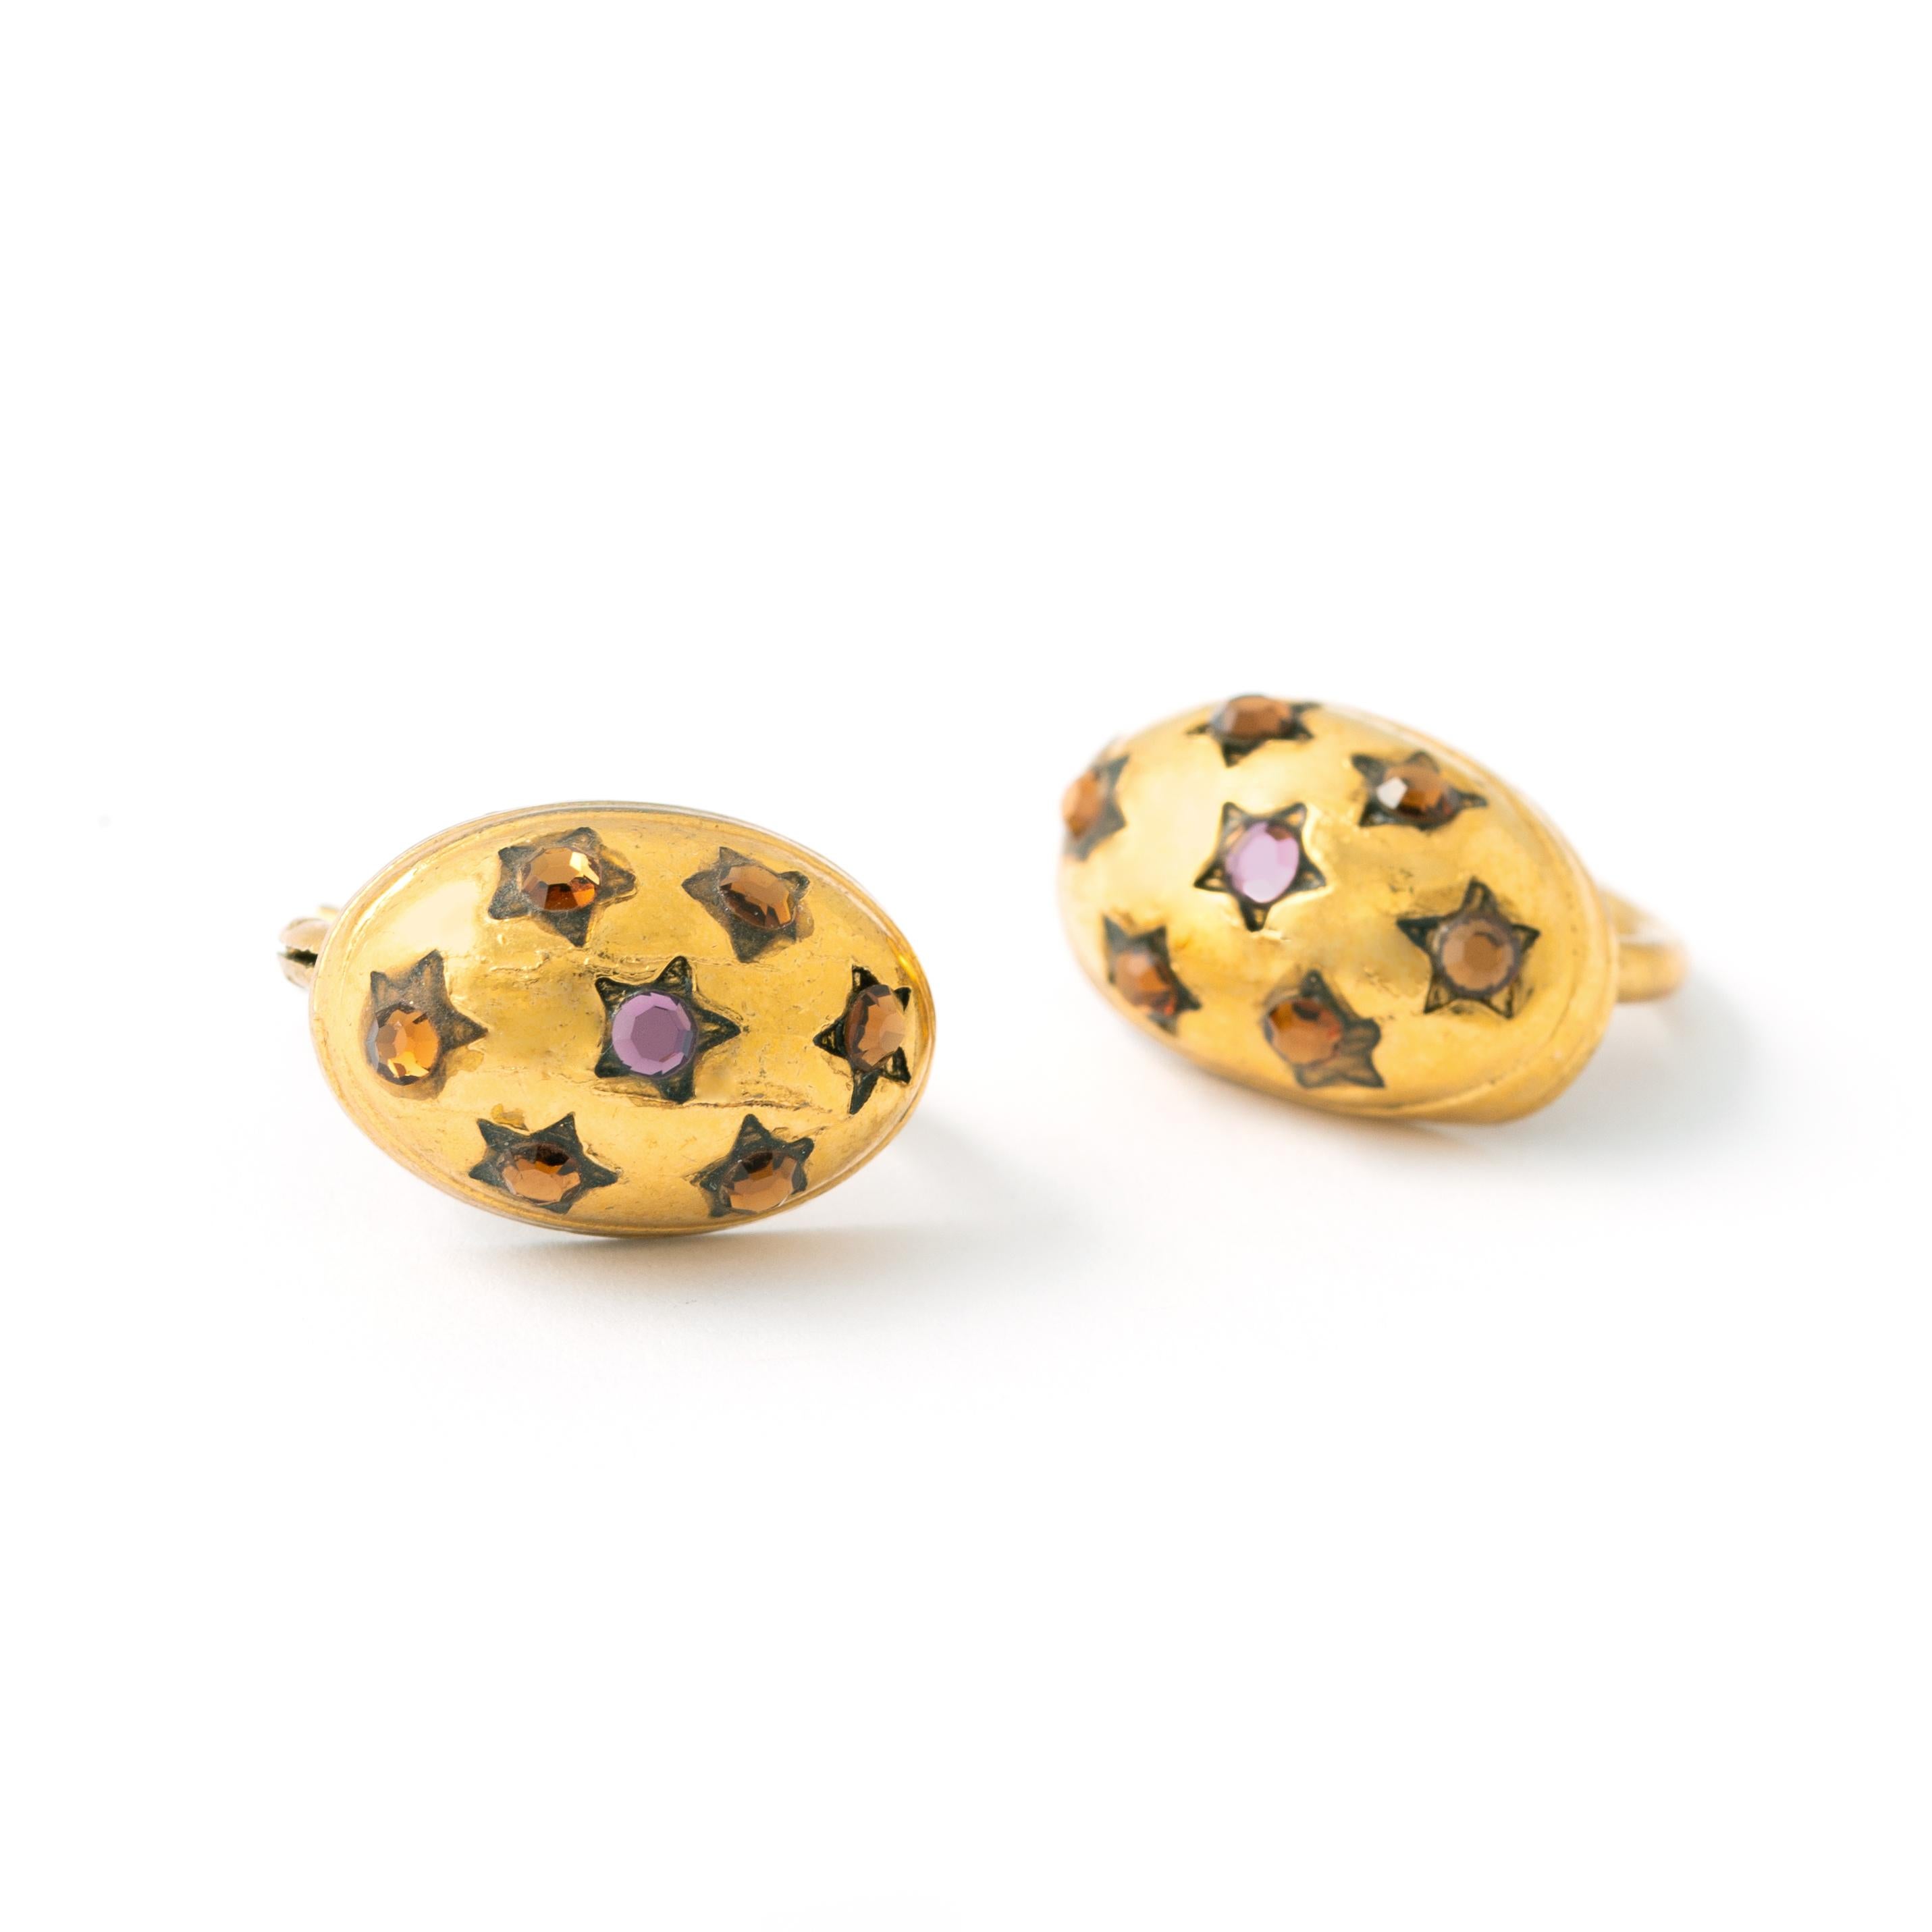 Vintage Earrings Colored Stones mounted on gold color metal.
Height: 1.60 cm. 
Gross weight: 4.60 grams.
